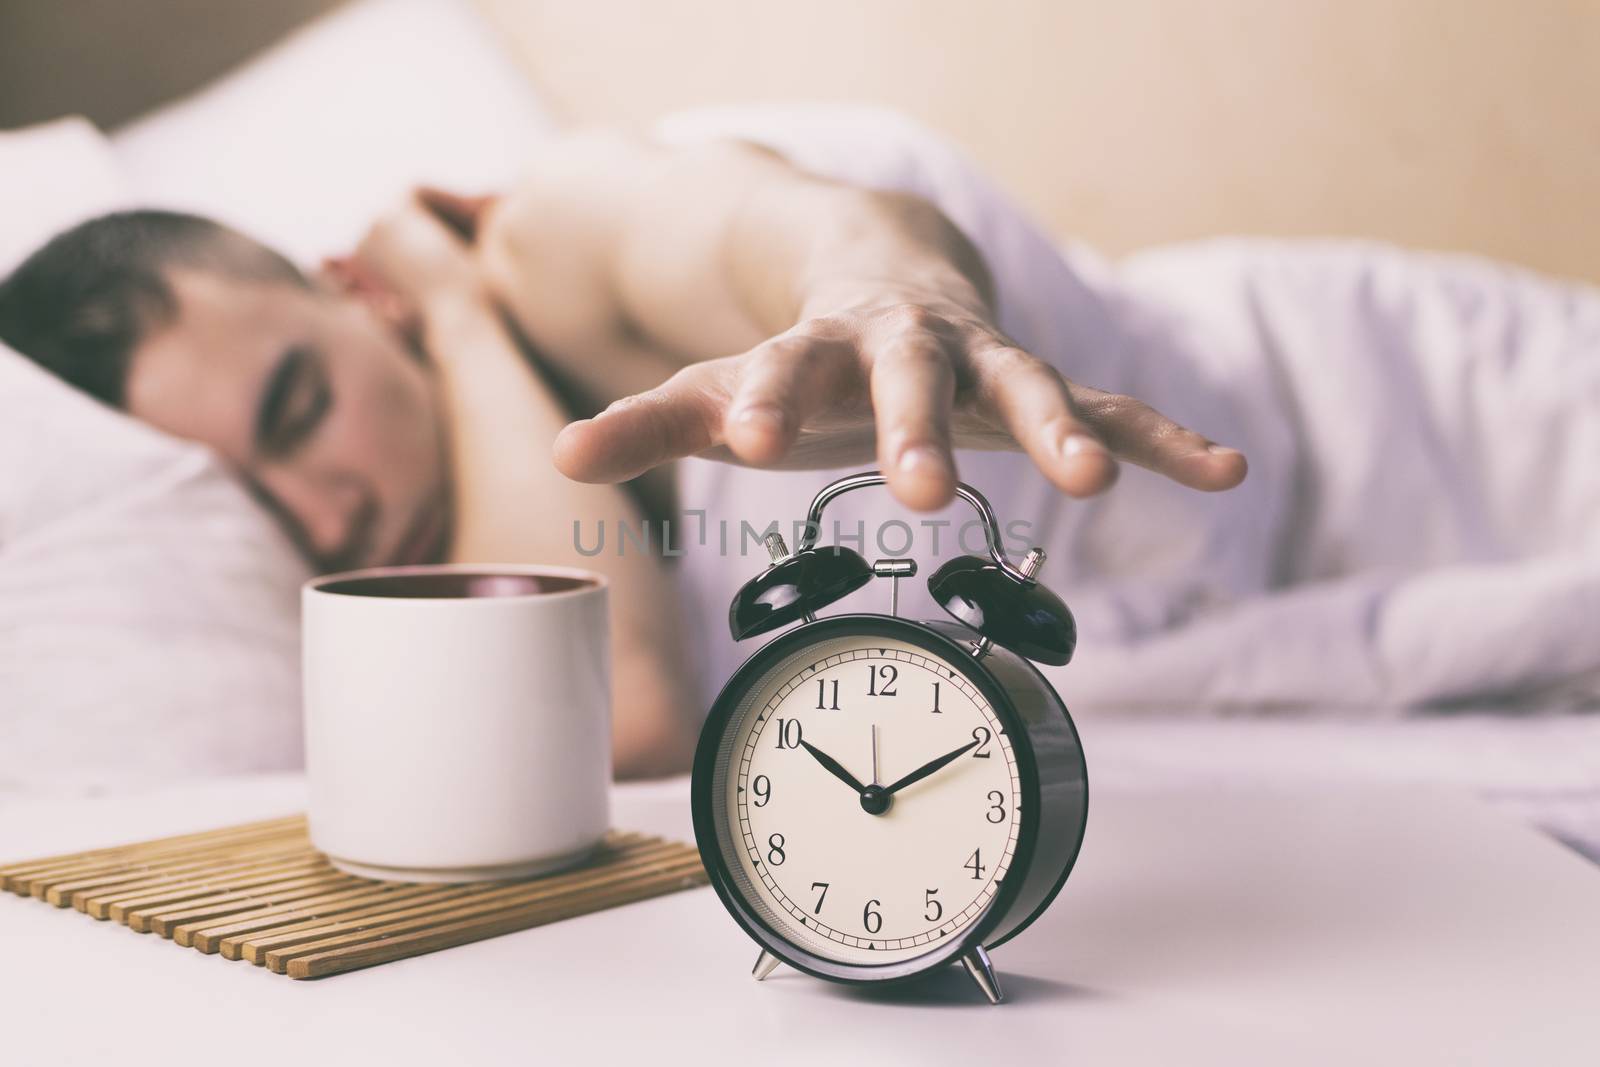 The young man turns off the alarm clock in the morning